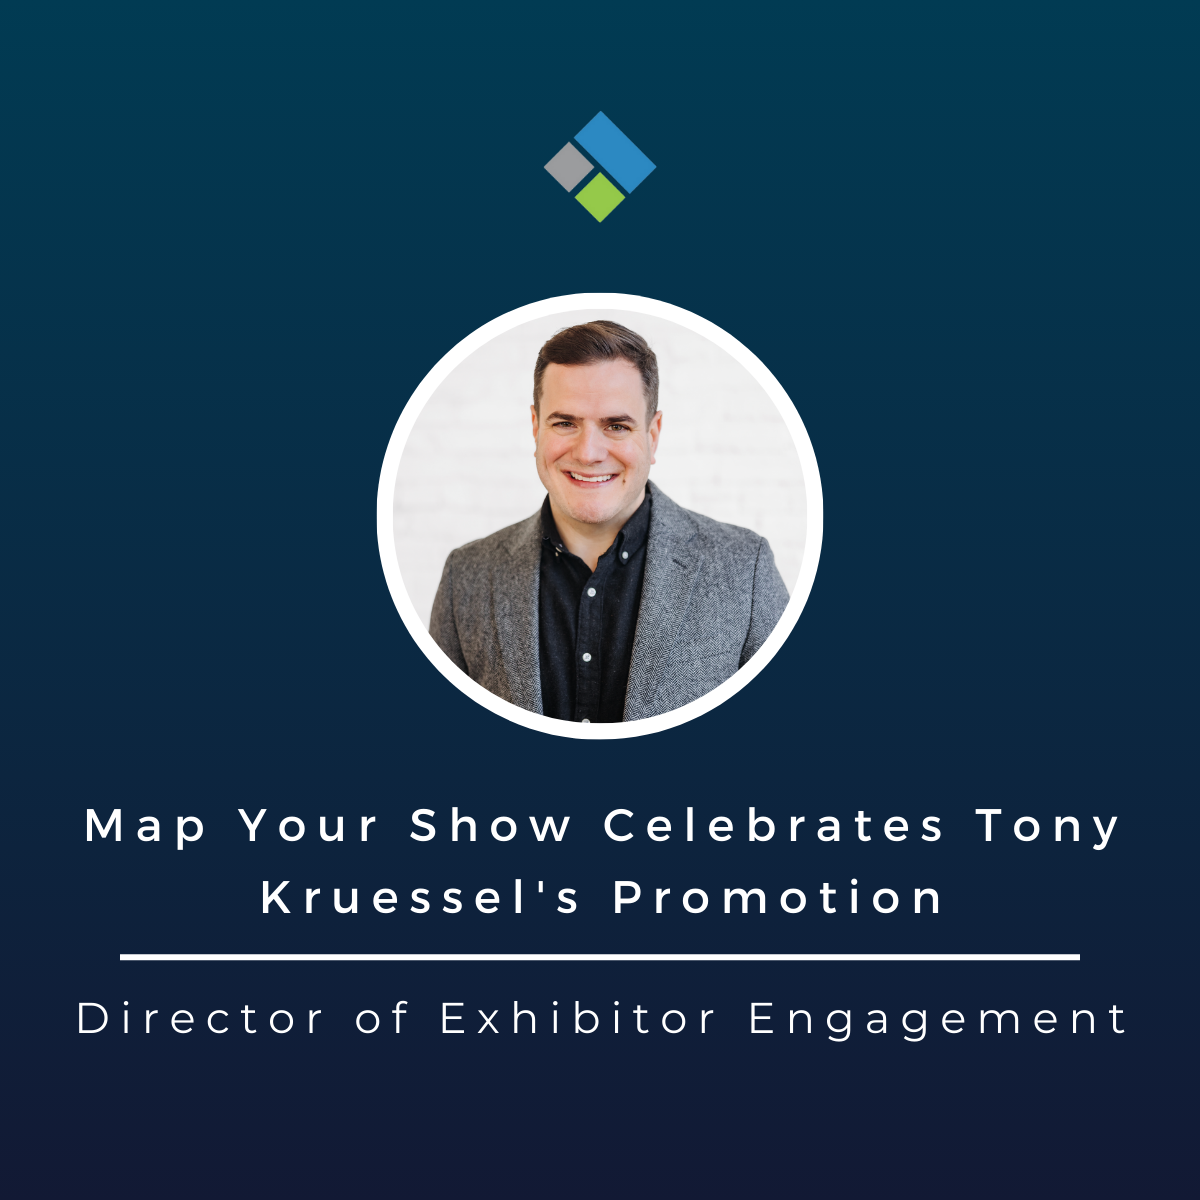 Map Your Show Celebrates Tony Kruessel's Promotion to Director of Exhibitor Engagement